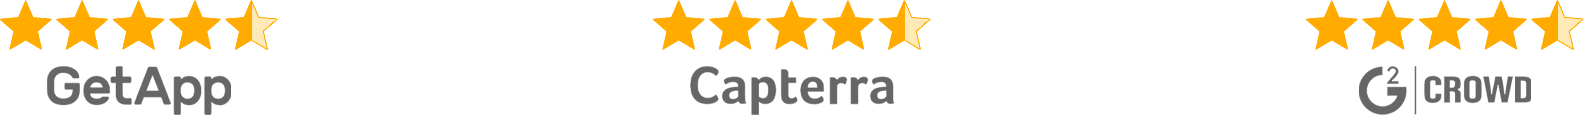 4.5 Stars Review Sites Row